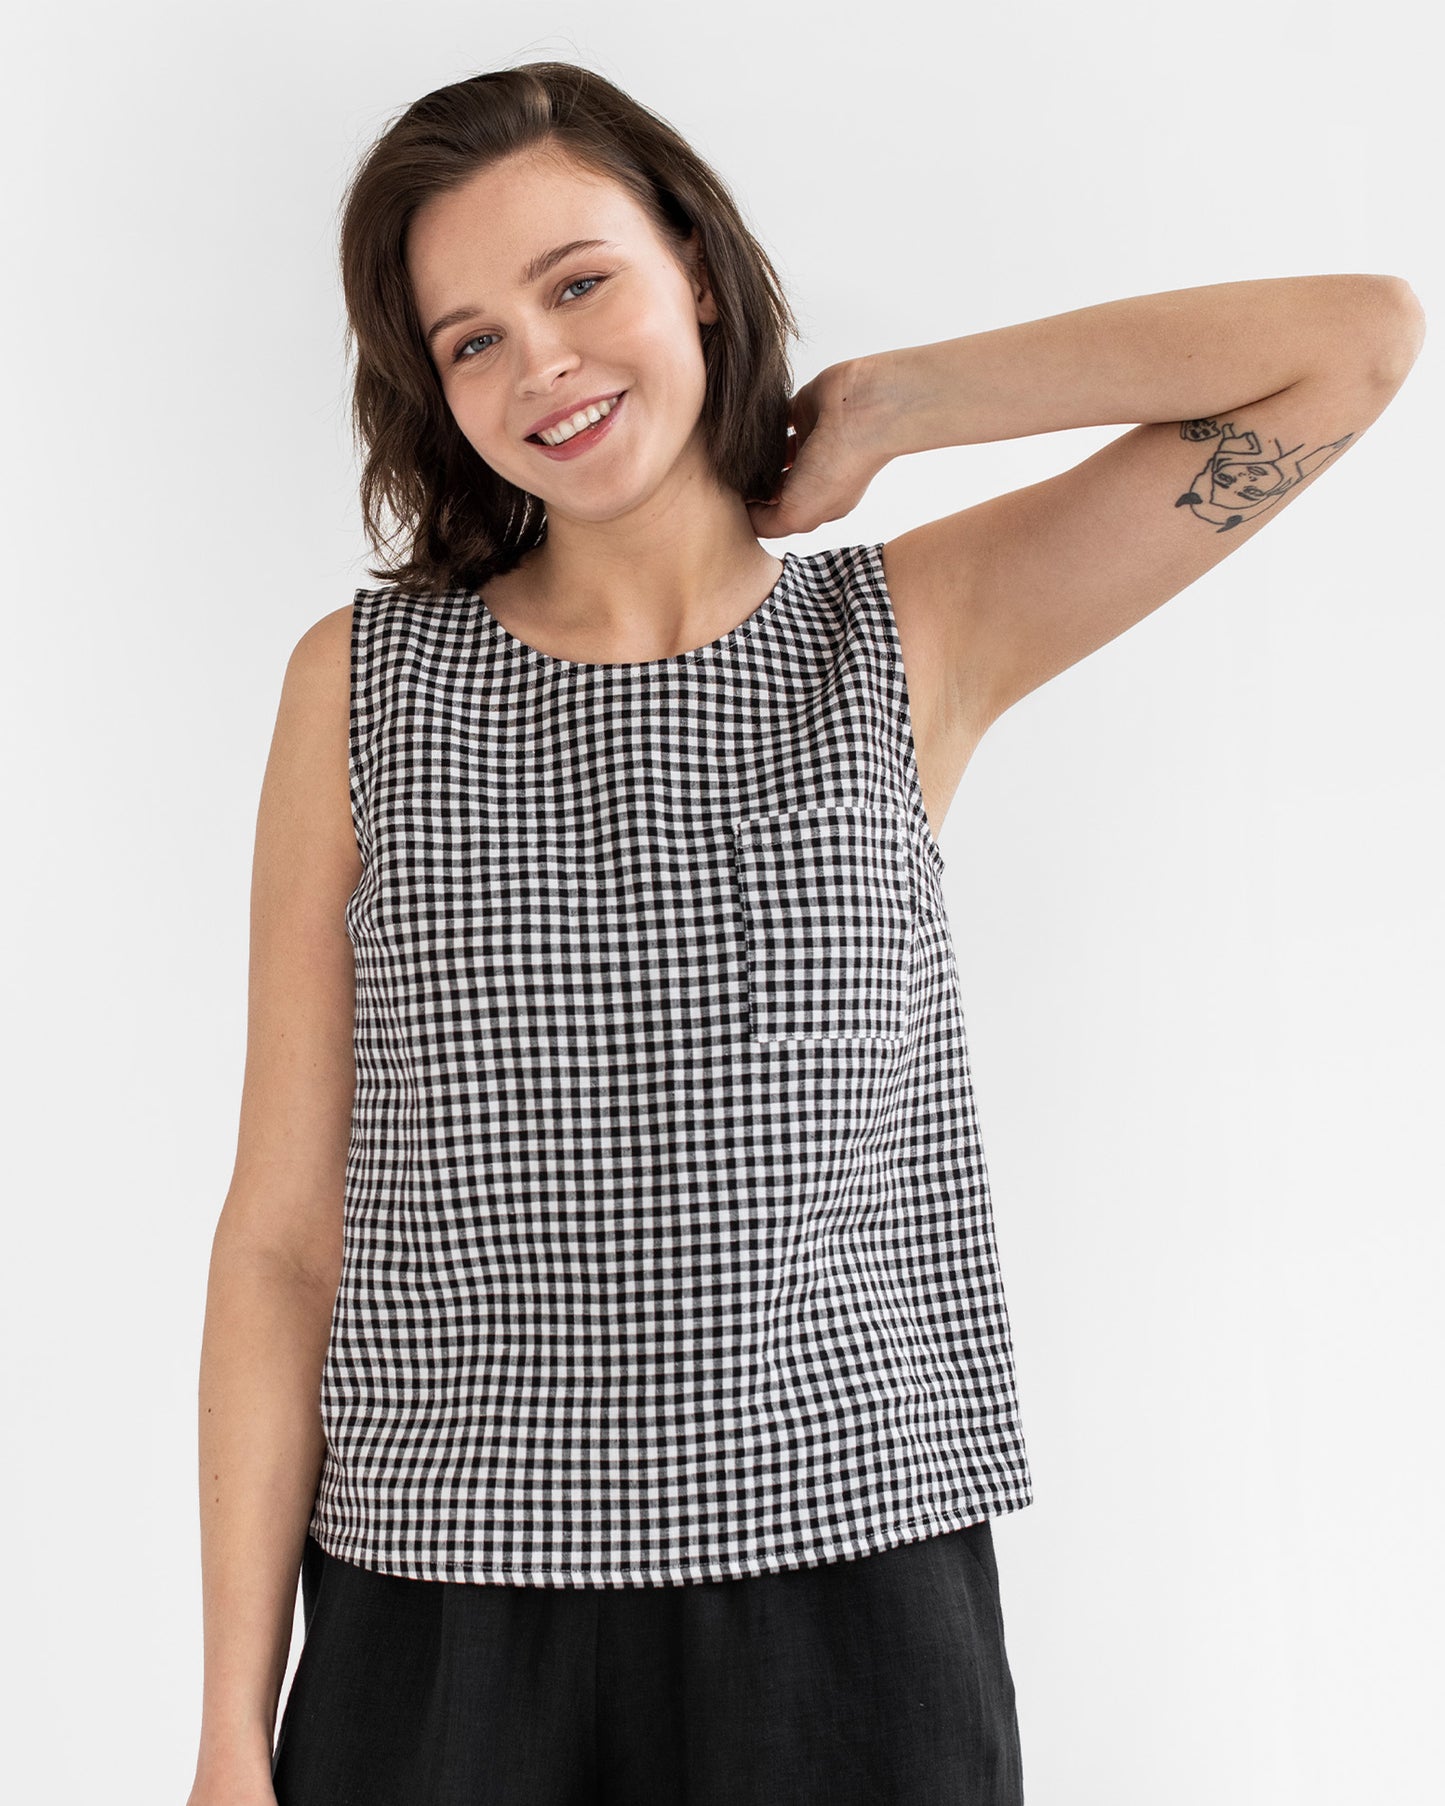 Sleeveless linen top SILAY in Black gingham - MagicLinen